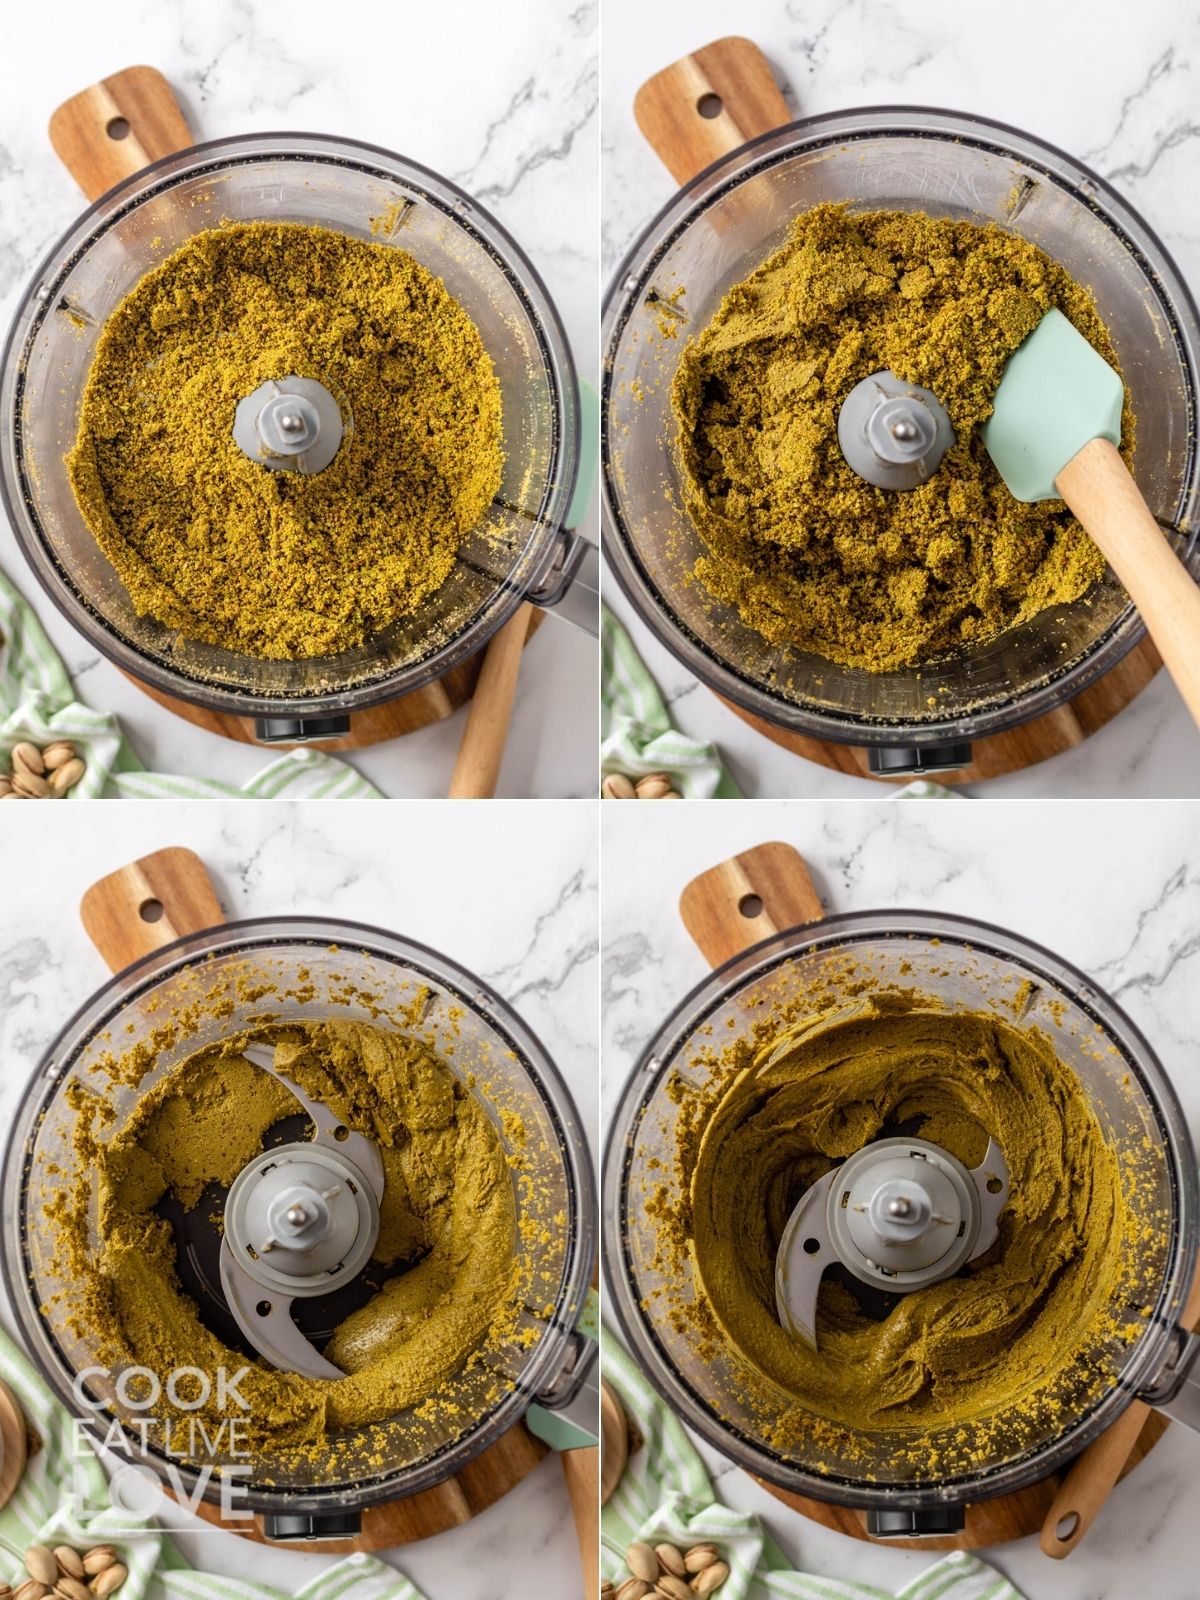 Collage of making pistachio butter at different stages of mixing.